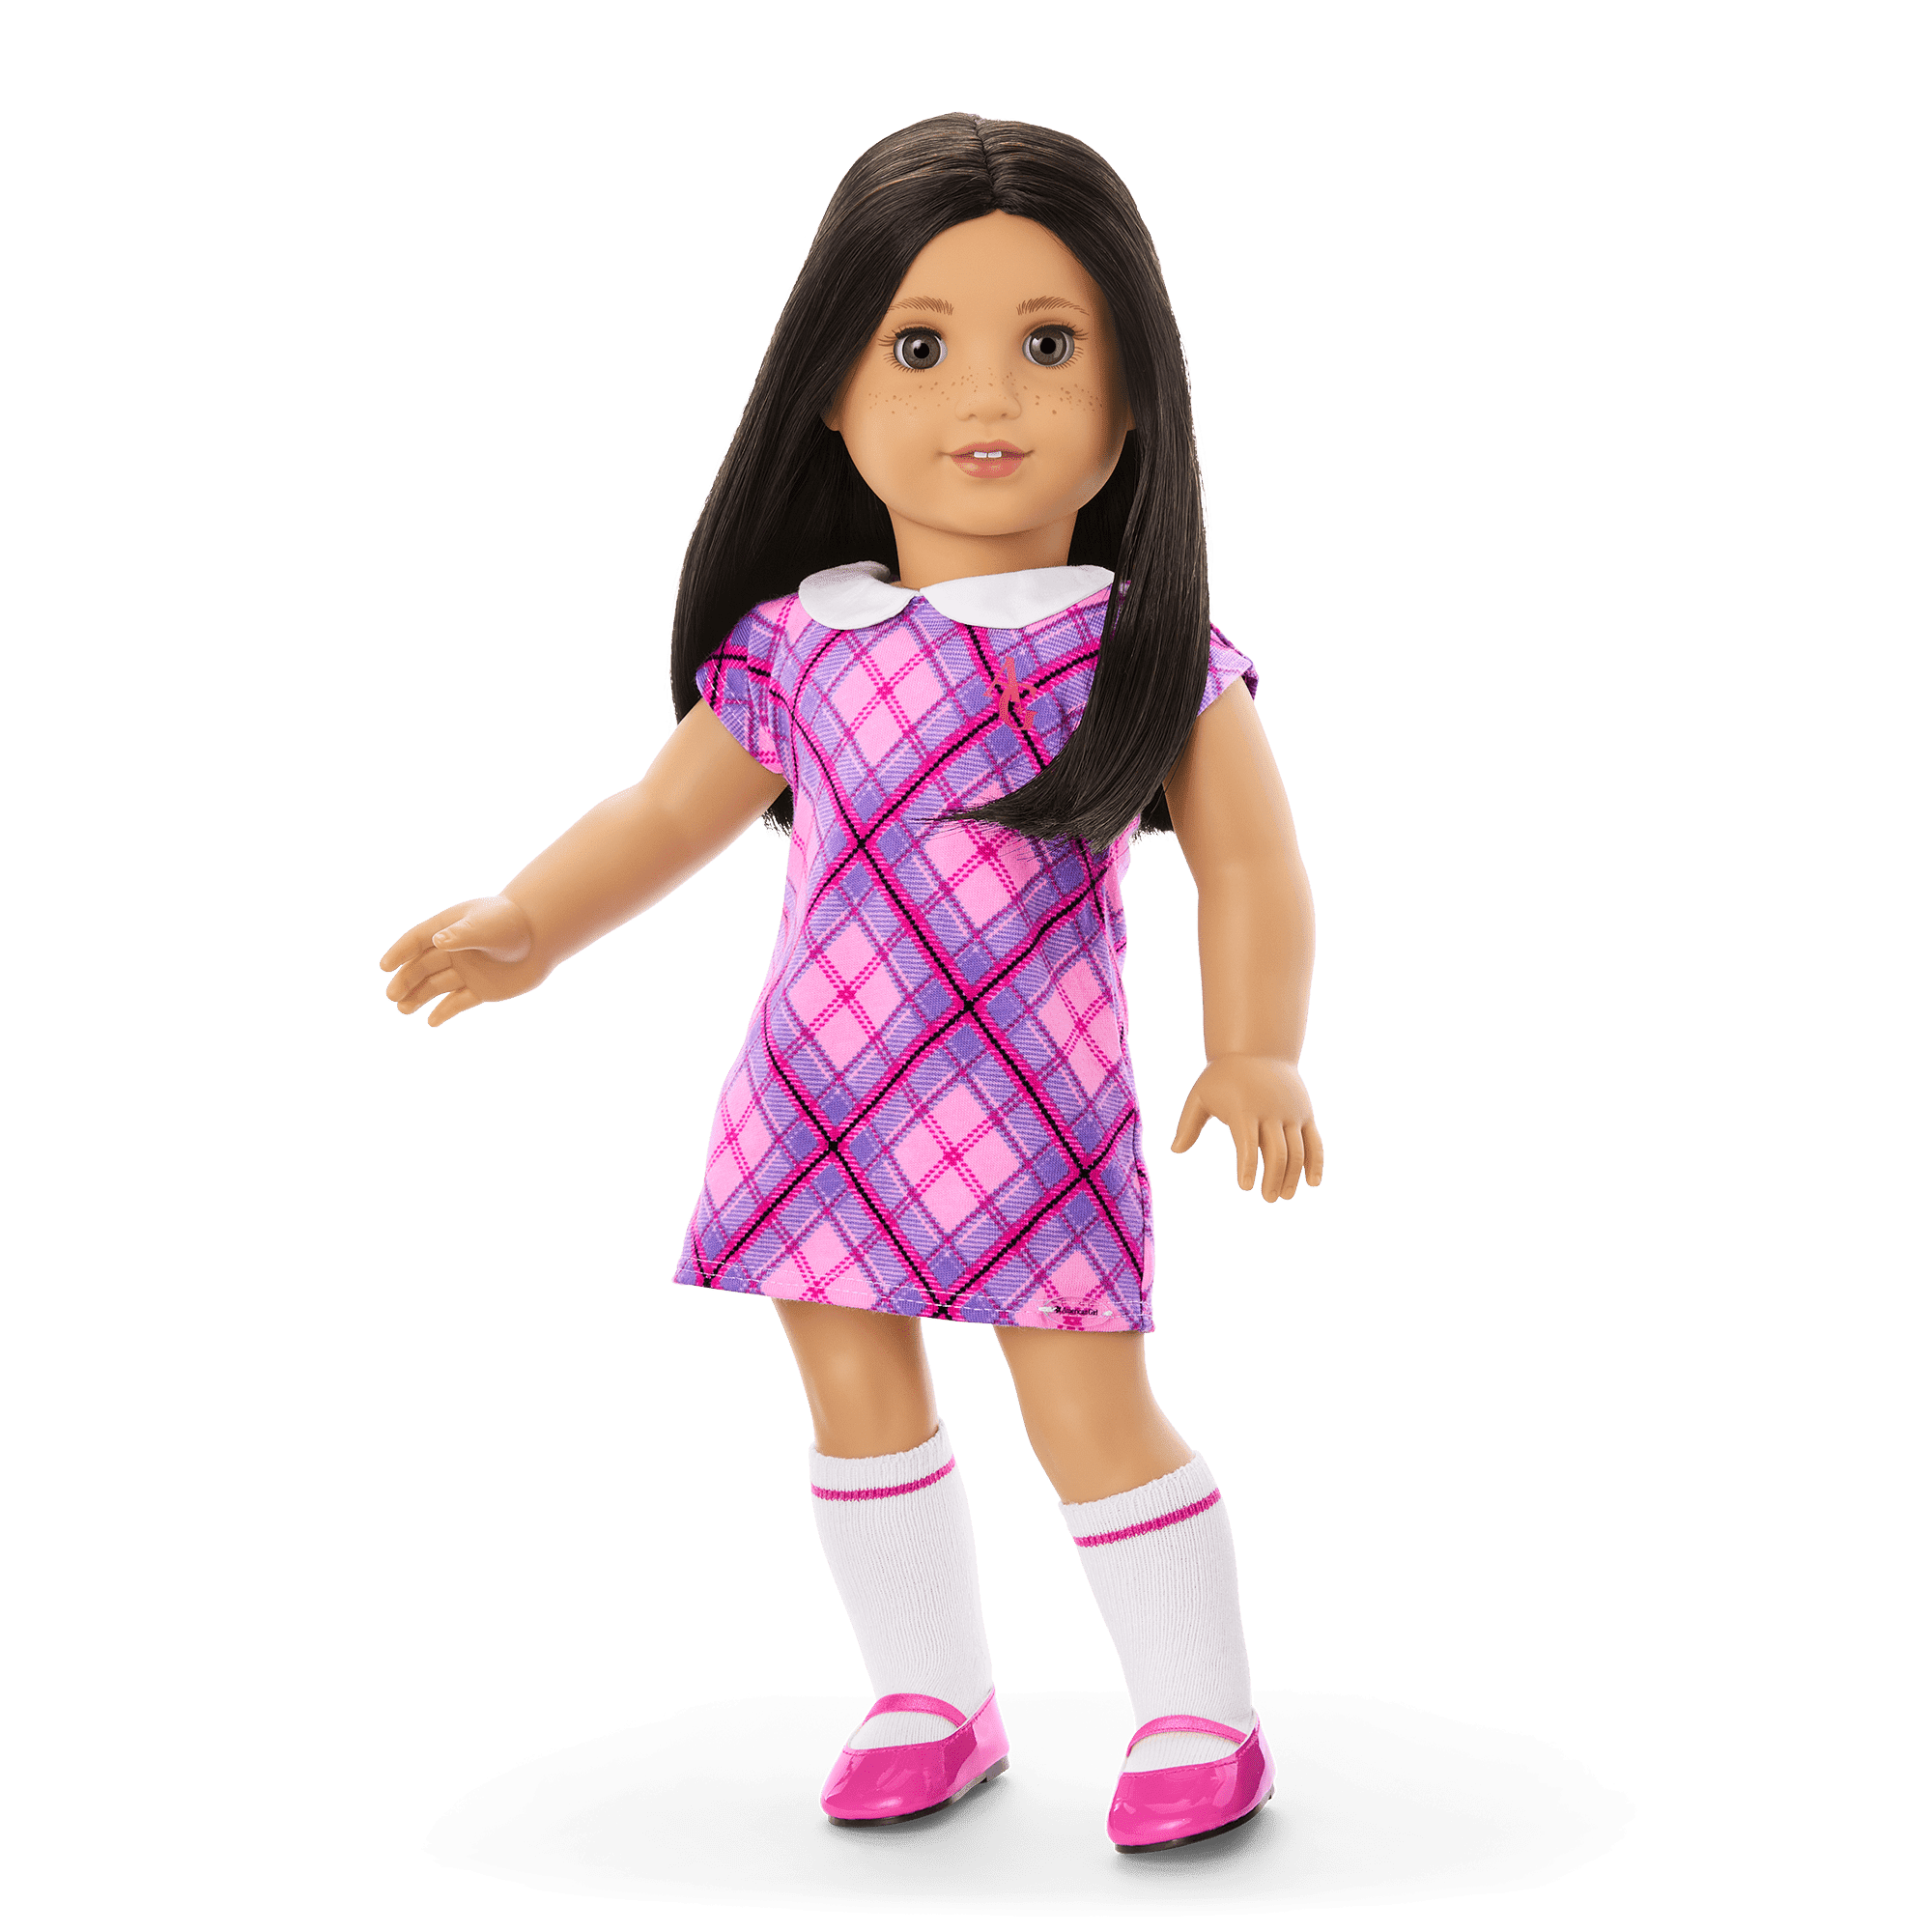 Pretty Plaid Outfit for 18-inch Dolls